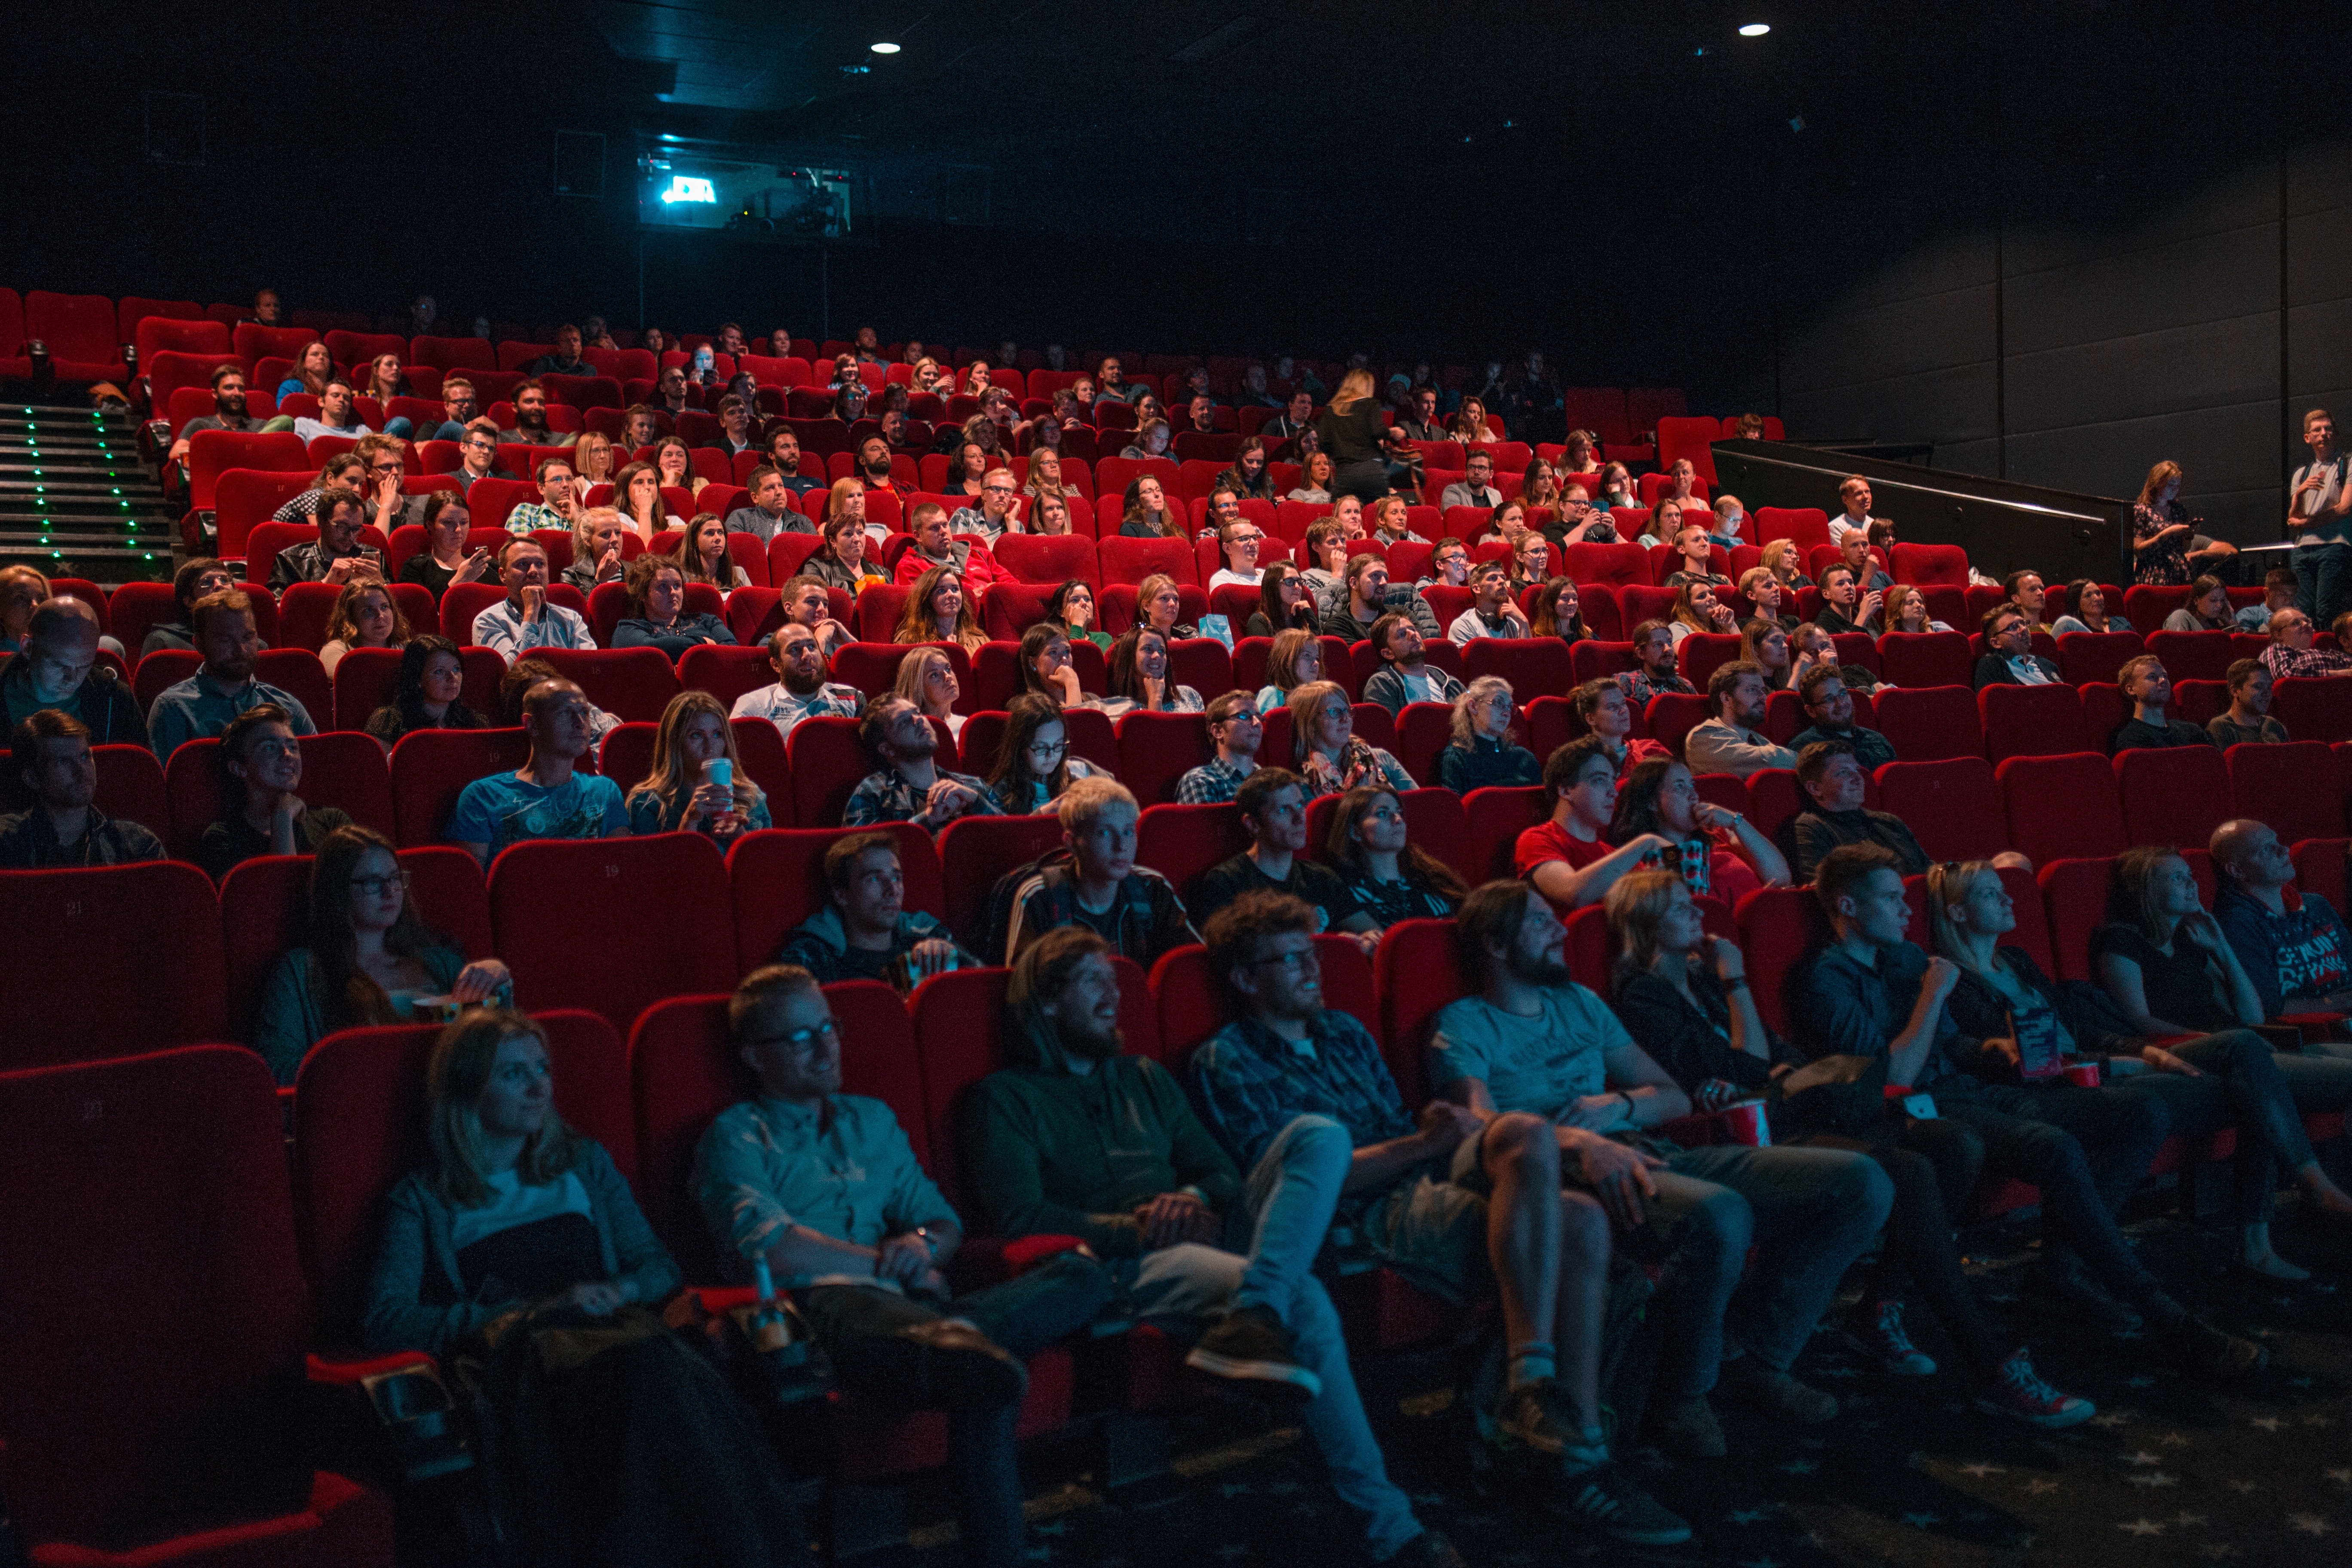 5472x3648 watching film, audience, sitting, movie, small cinema, person, entertain, watching, theatre, people, Public domain image, red, movie theatre, cinema, velvet Gallery HD Wallpaper